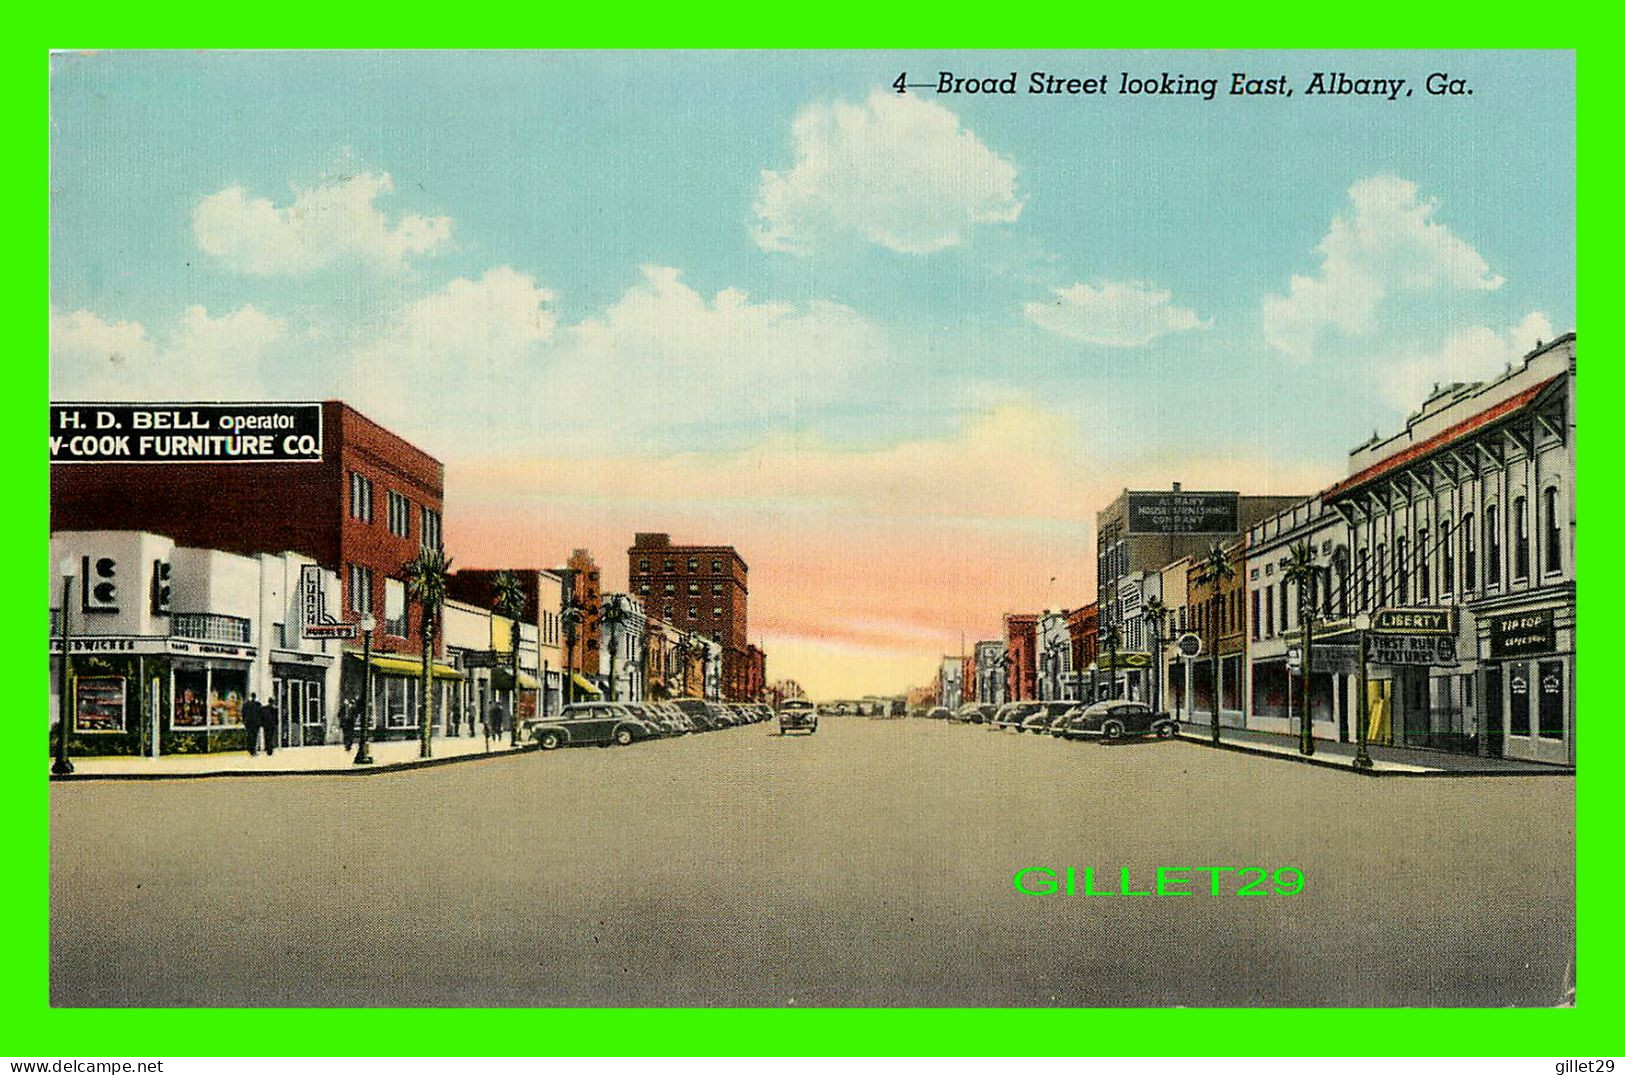 ALBANY, GA - BROAD STREET LOOKING EAST - ANIMATED OLD CAES -  TRAVEL IN 1943 - GEORGIA CIGAR & TOBACCO CO - - Albany